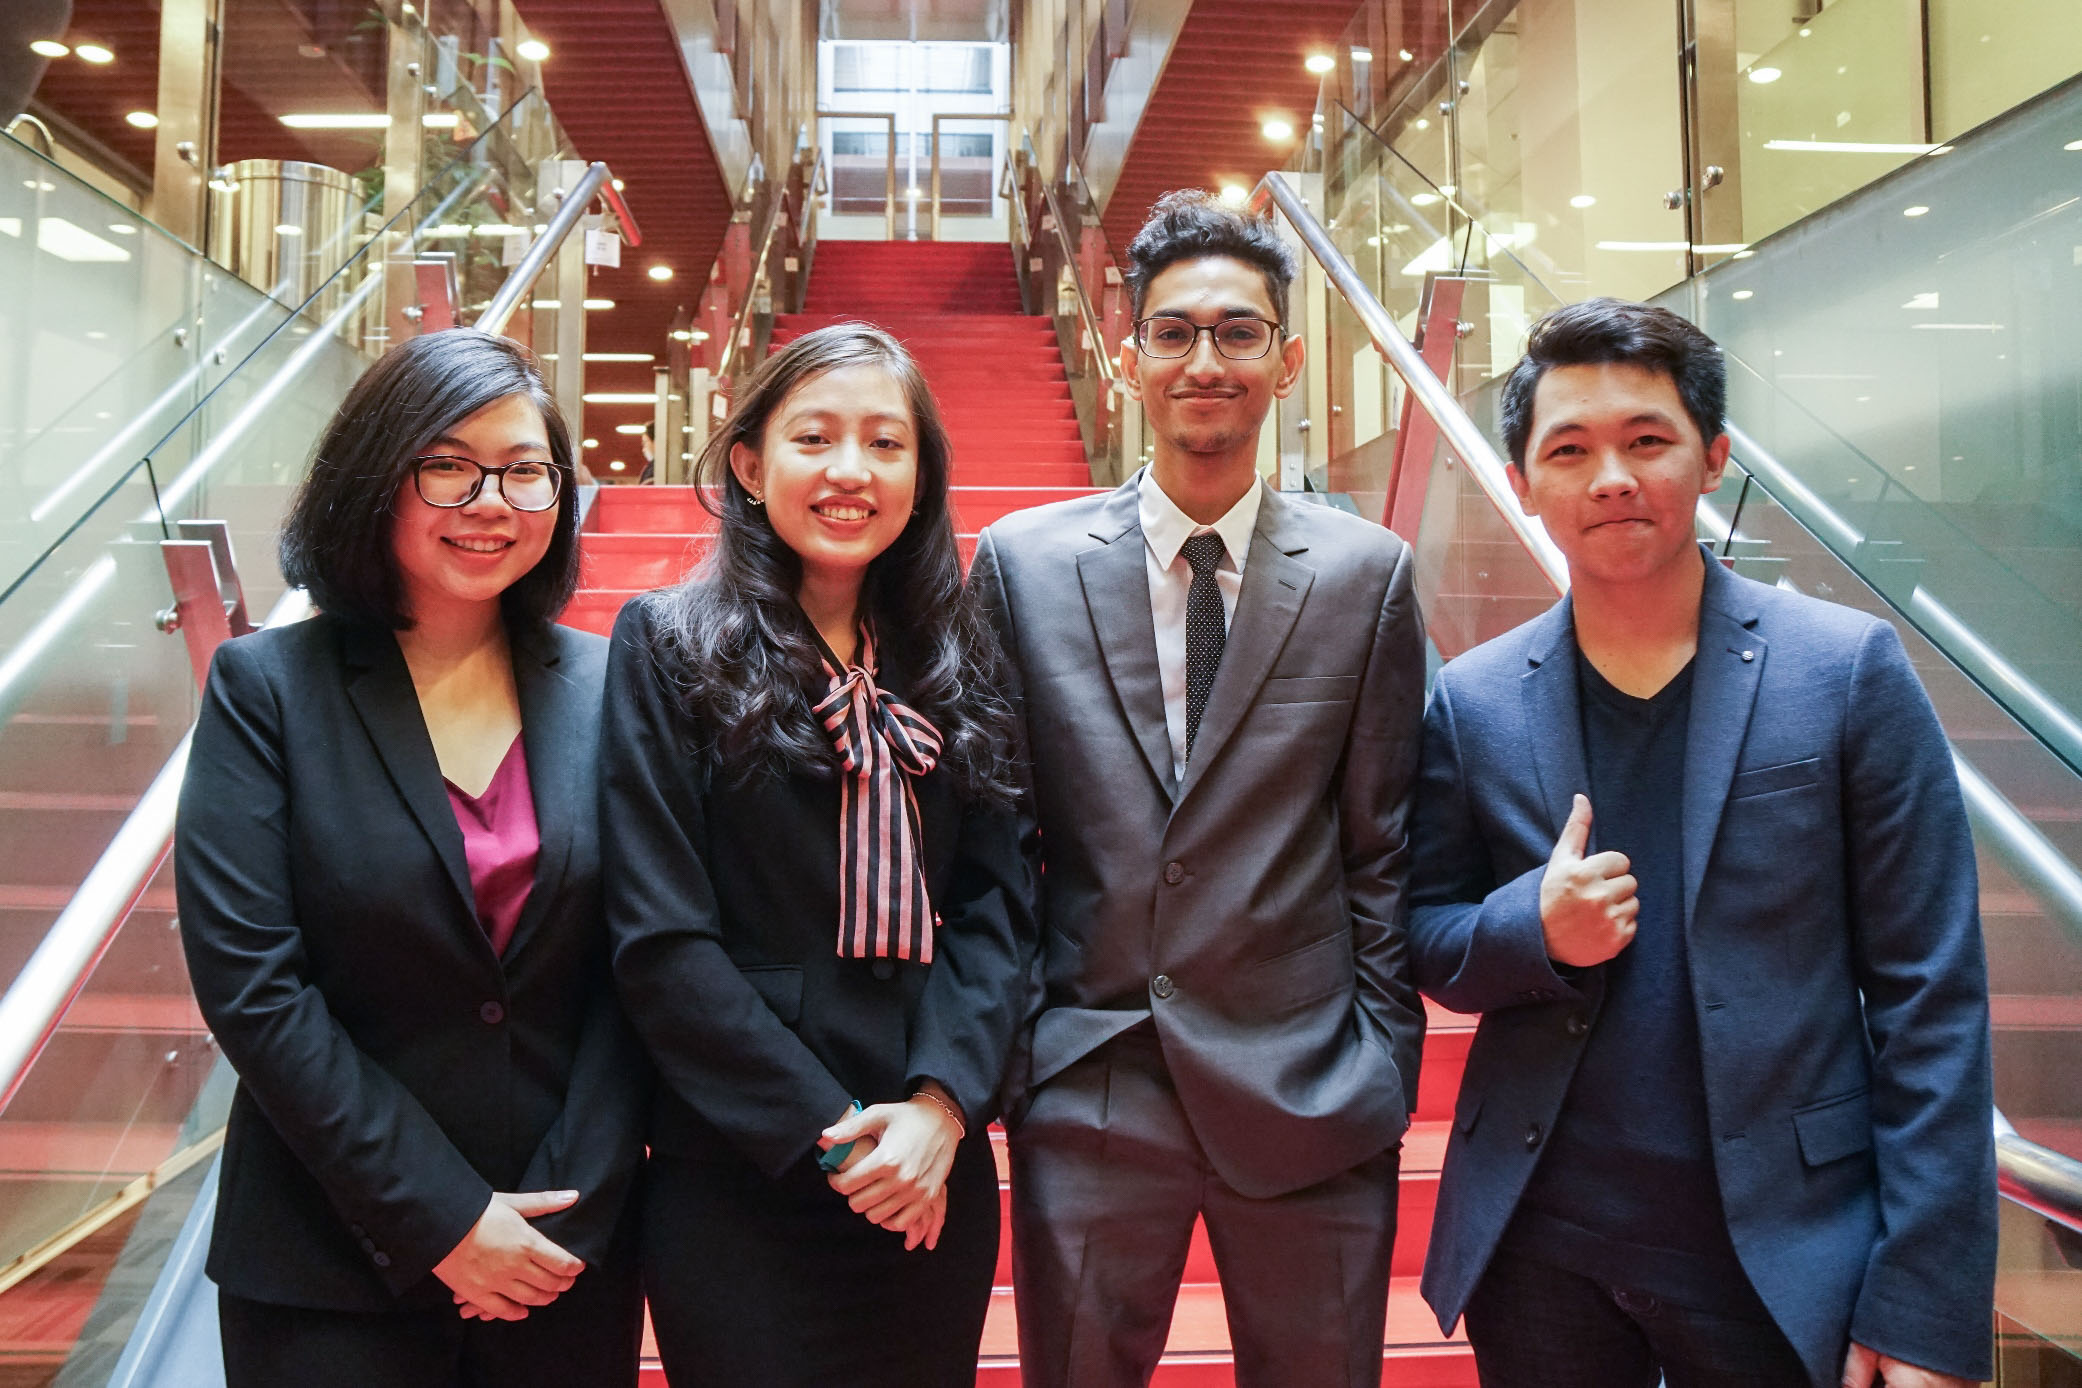 (From left to right) The Outliers team comprises of Tran Vo Thanh Tu, Nguyen Hoang Yen Khanh, Rahul Ravindranath and Luu Thai Quang Khai.